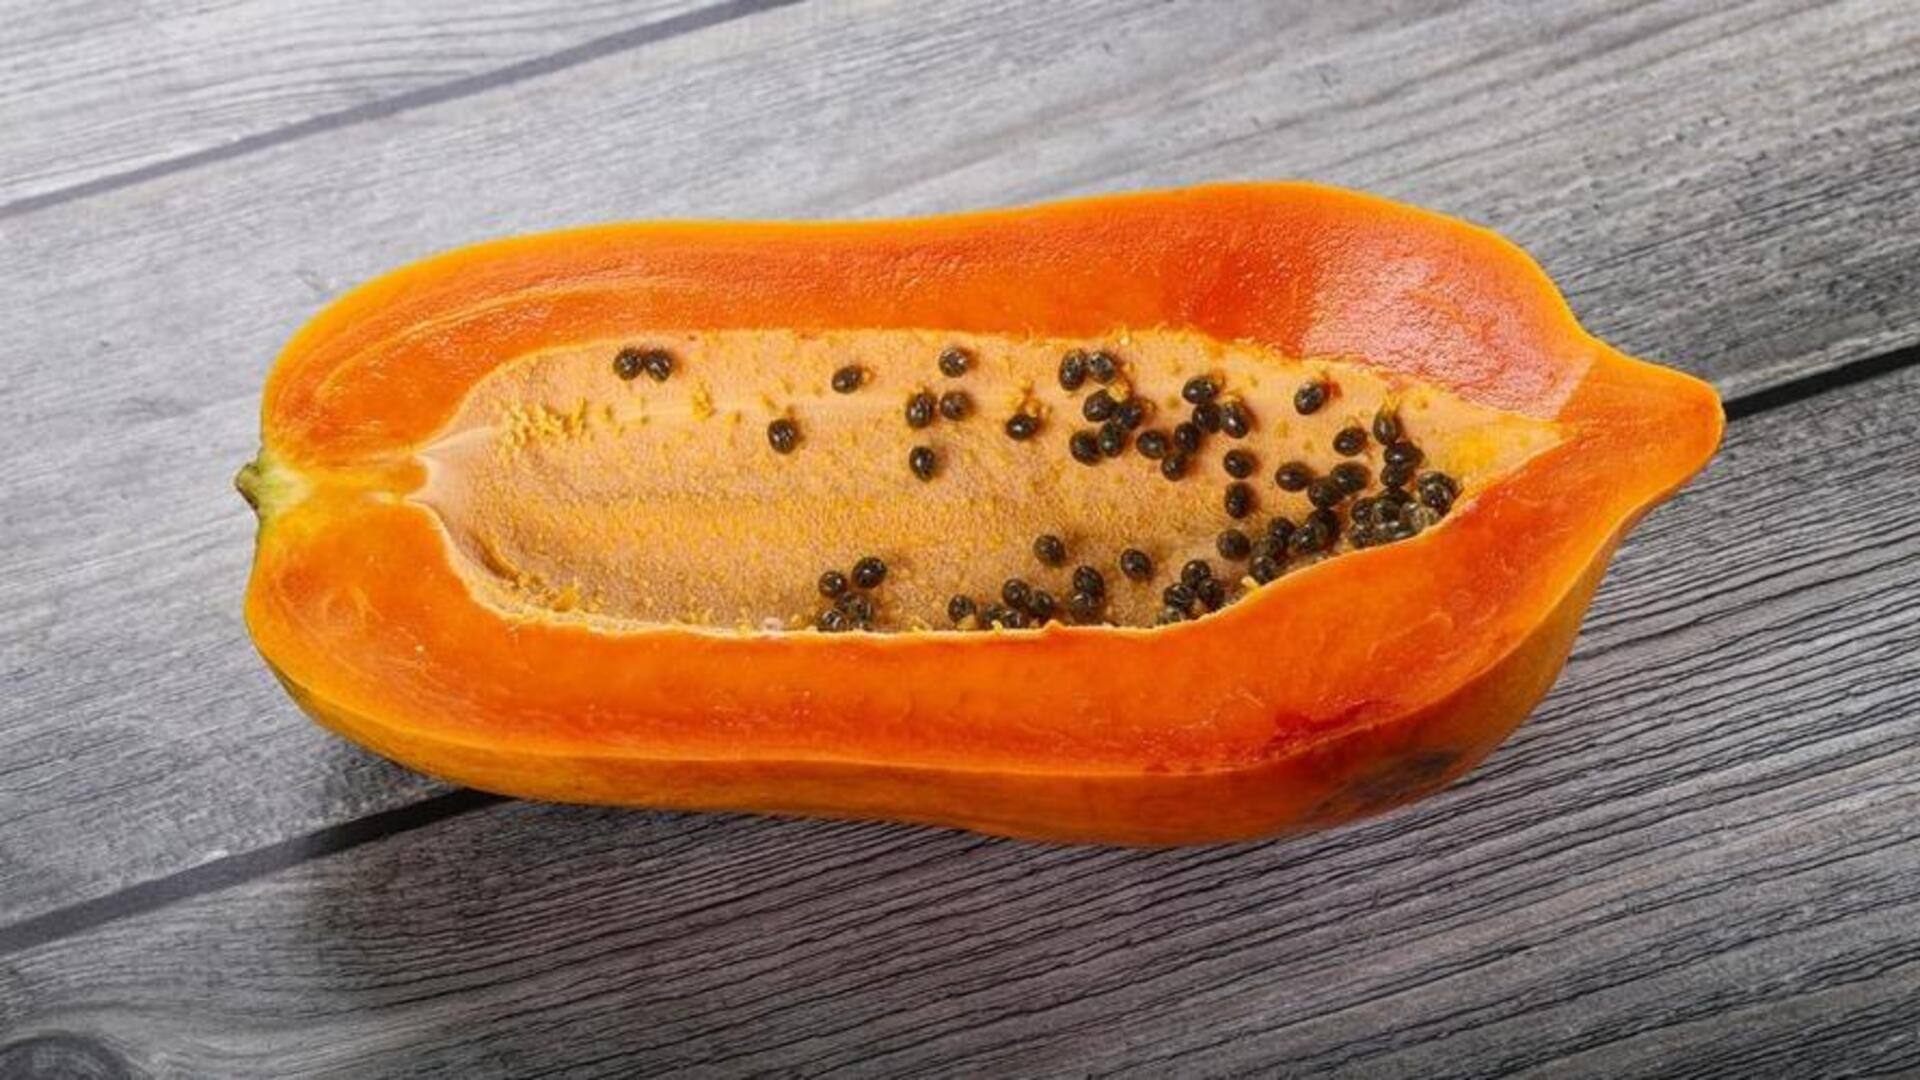 Papaya seeds are great for health. Here's why